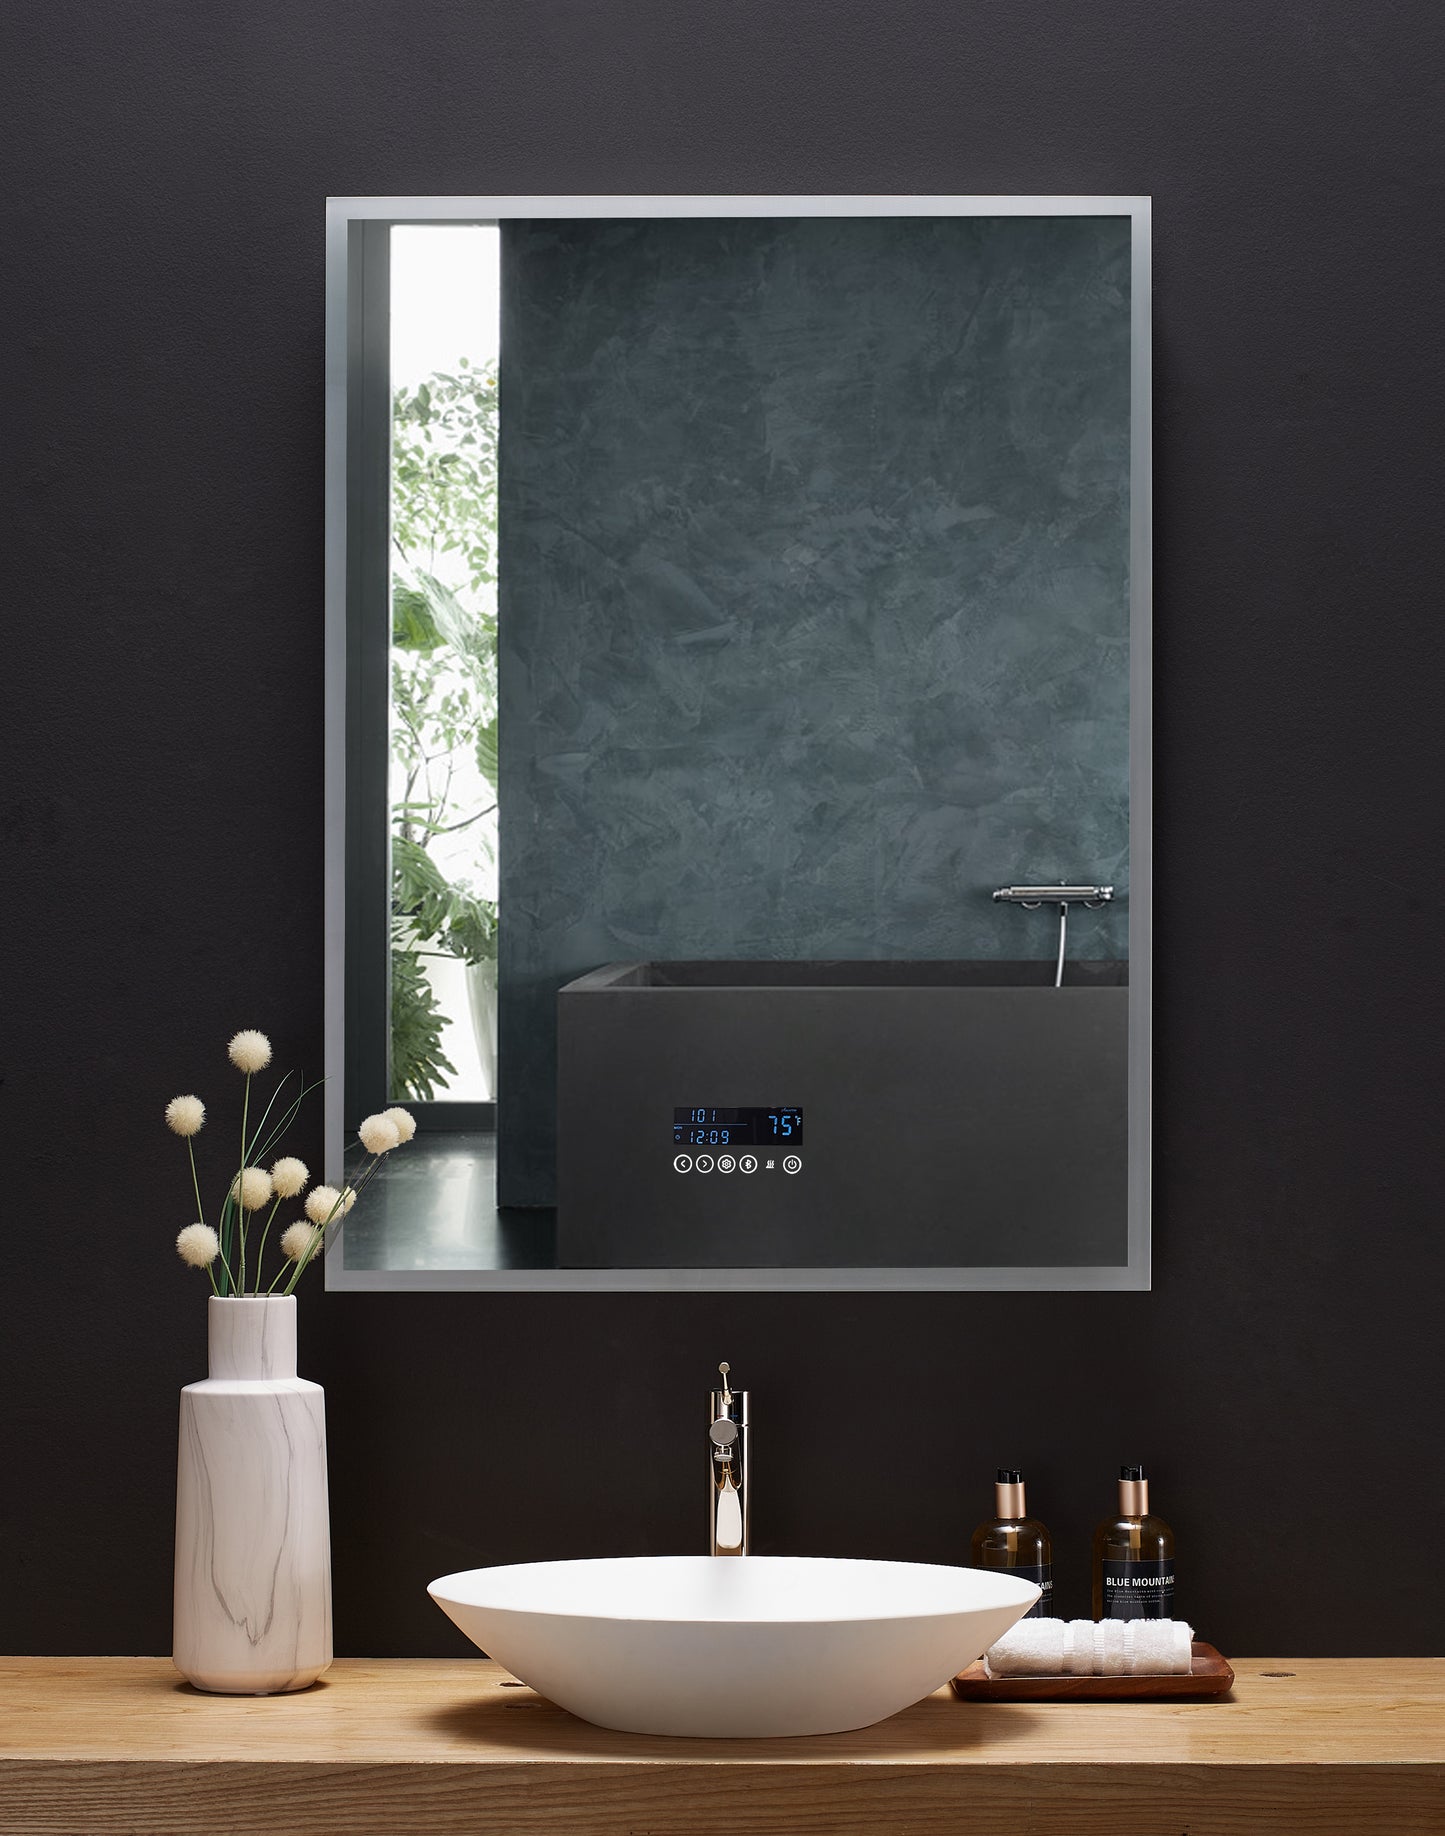 IMMERSION 30 in. x 40 in. LED Frameless Mirror with Bluetooth, Defogger and Digital Display